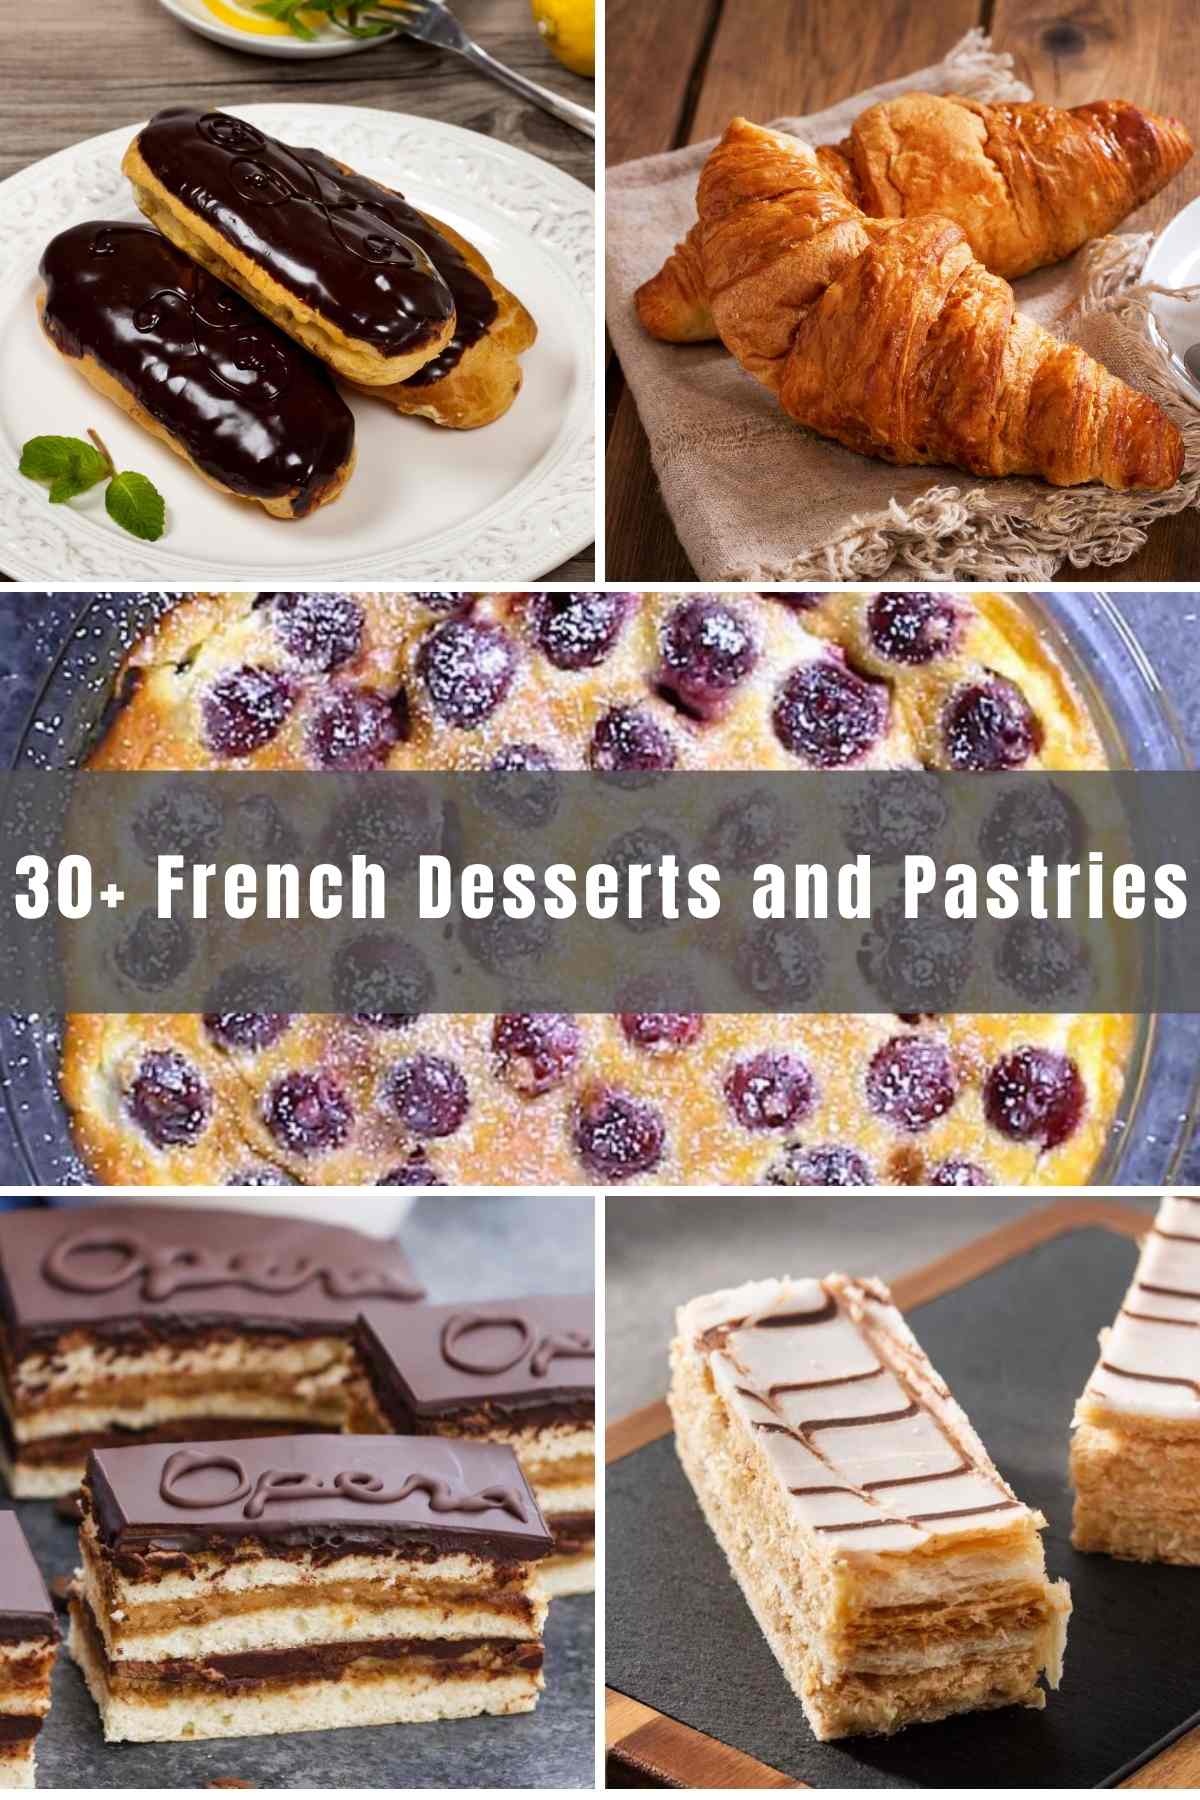 French cuisine is very popular around the world, and it is especially known for its love of desserts and pastries! Here we’ve rounded up over 30 of the best French Desserts and pastries for you to try in your own kitchen! Good luck, and bon appetit!